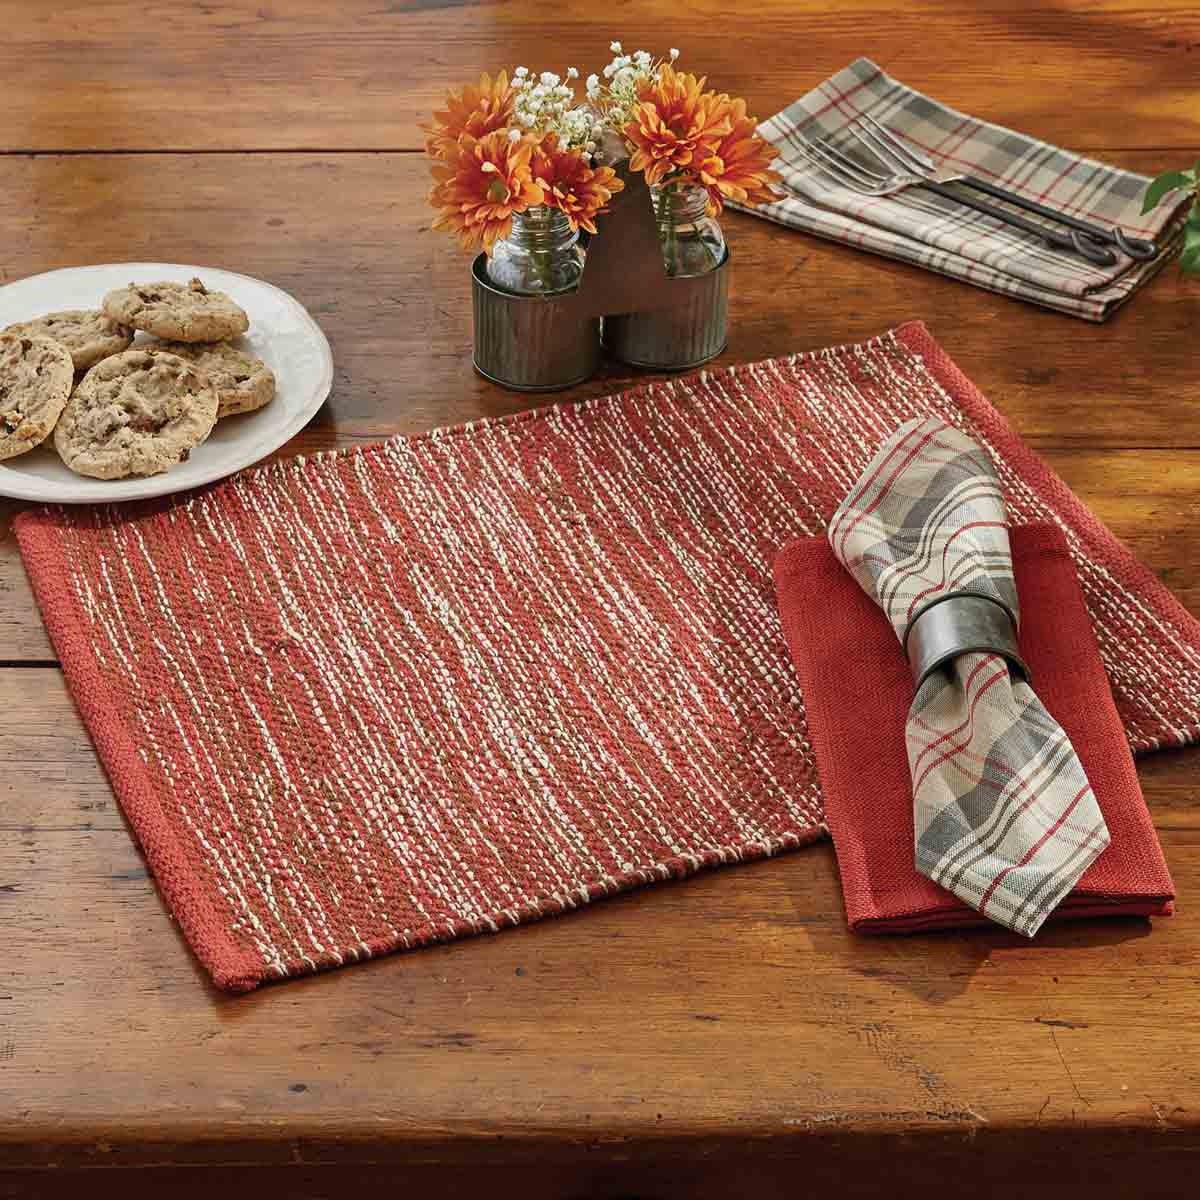 Ashfield Placemats - Red Yarn Set Of 6 Park Designs